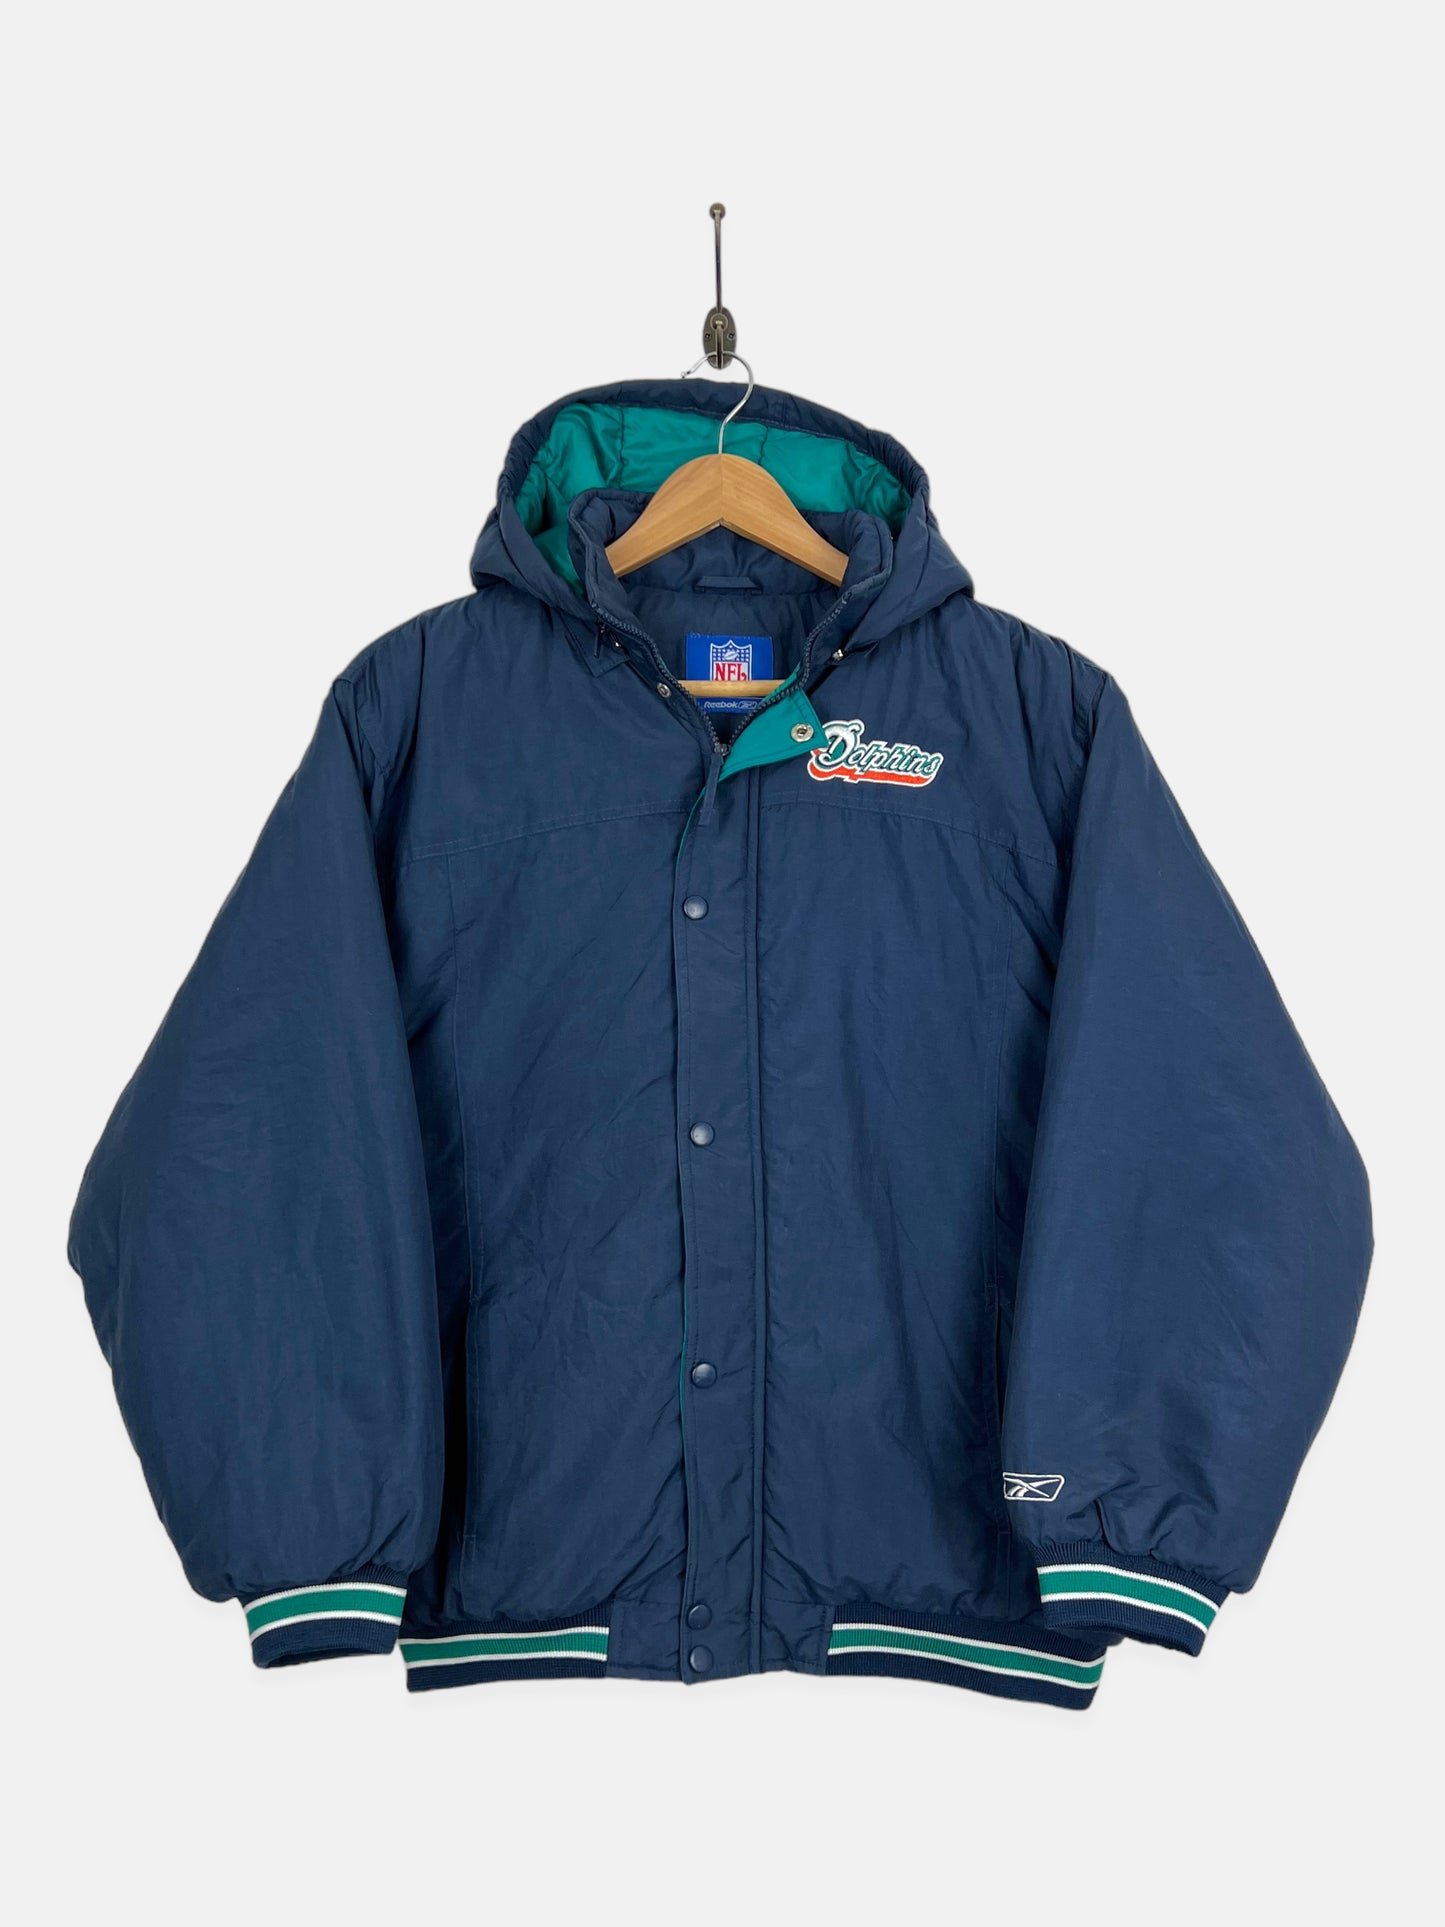 90's Miami Dolphins Reeebok NFL Embroidered Puffer Jacket Size M